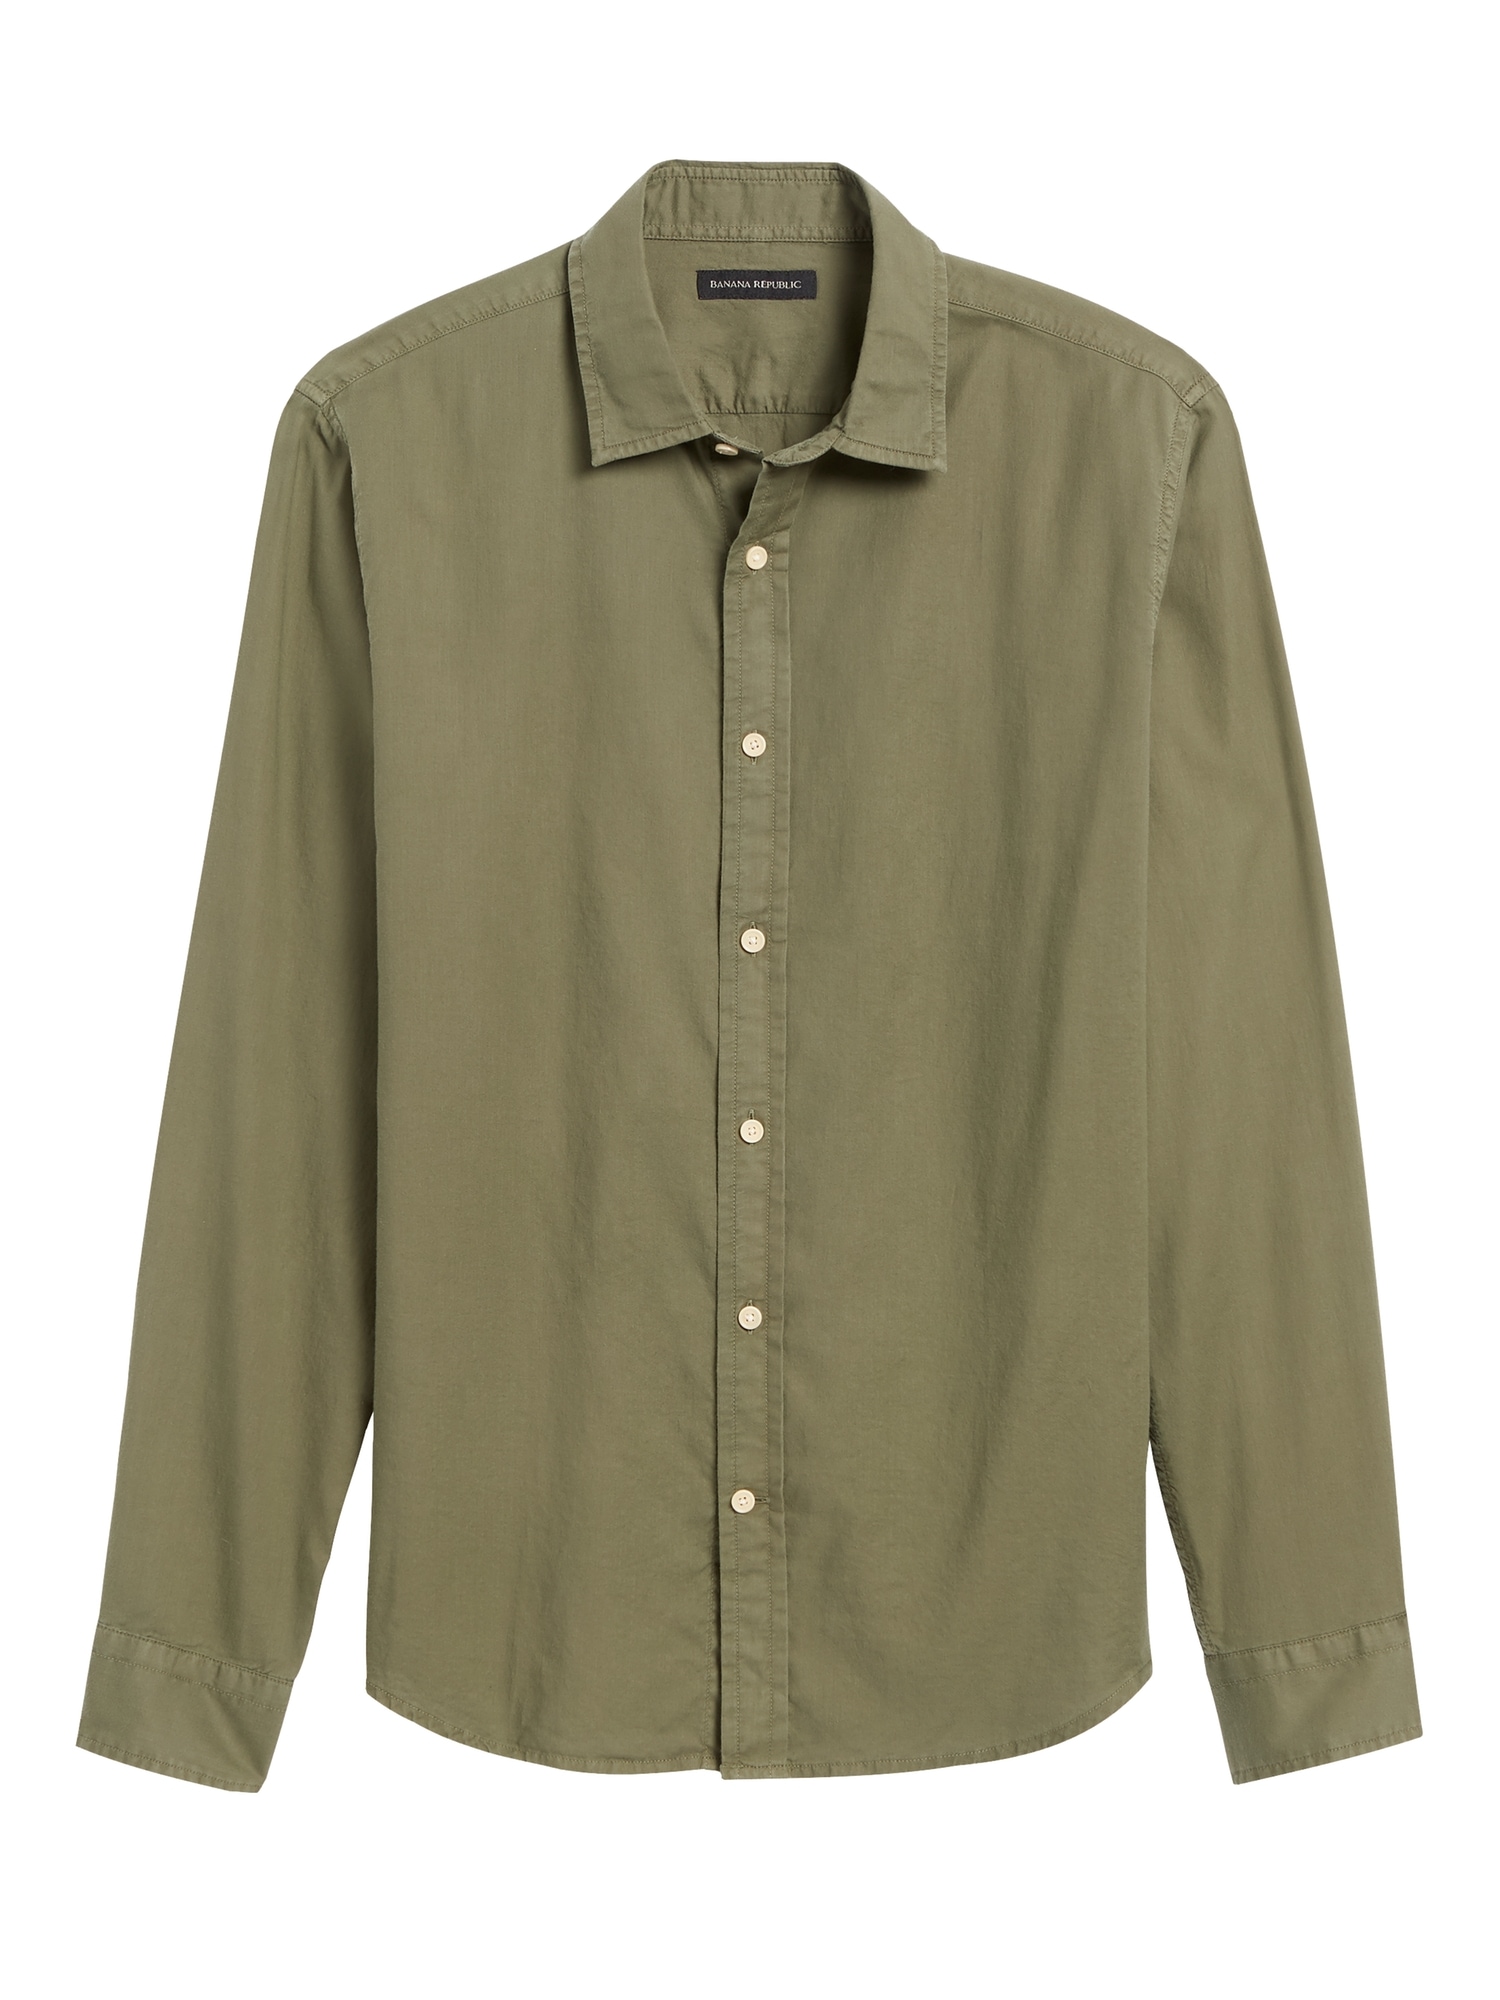 Untucked Standard-Fit Cotton Twill Shirt